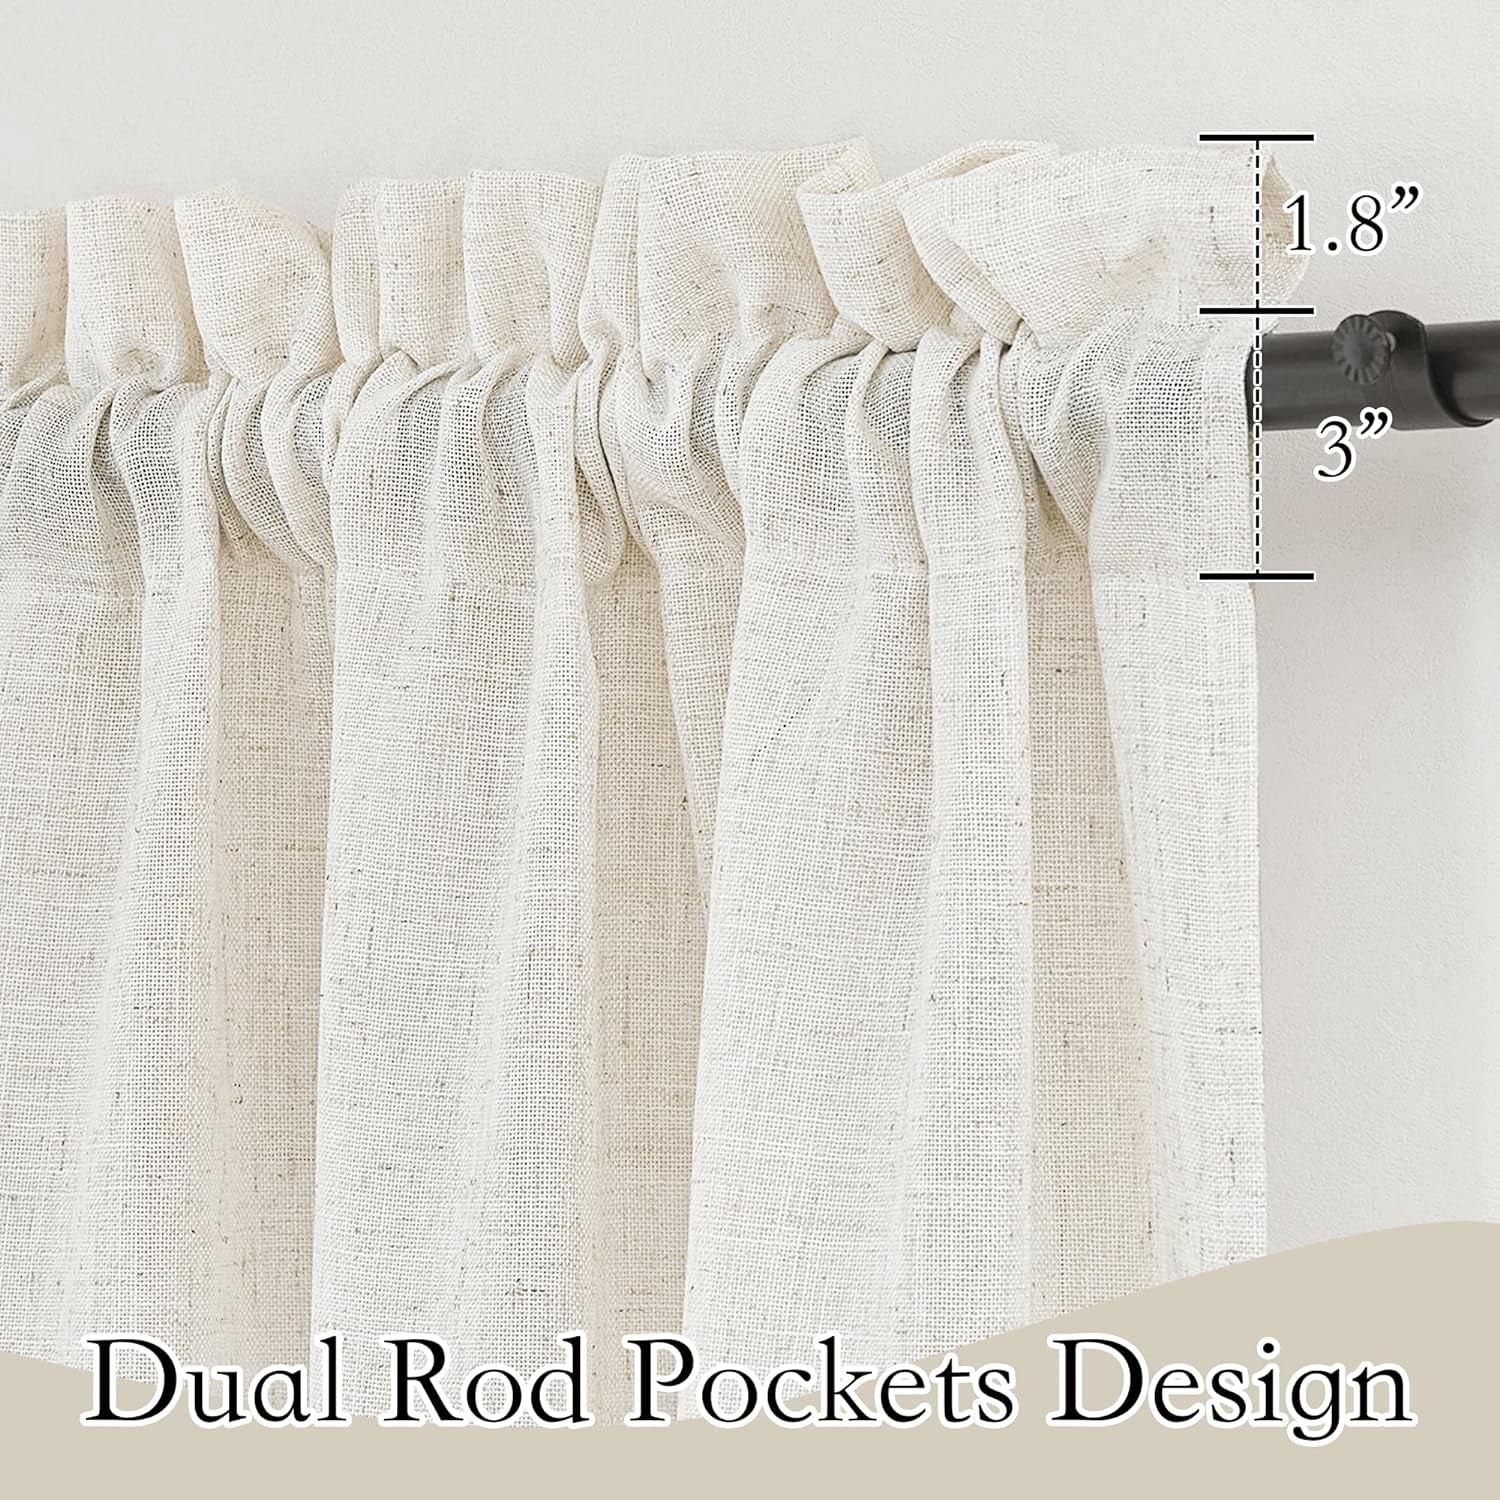 RYB HOME Linen Sheer Curtains 84 Inches Long, Semi Sheer Curtains for Living Room Bedroom Privacy Soften Sunlight Drapes for Farmhouse Cafe, W 52 X L 84, Linen, 2 Panels  RYB HOME   